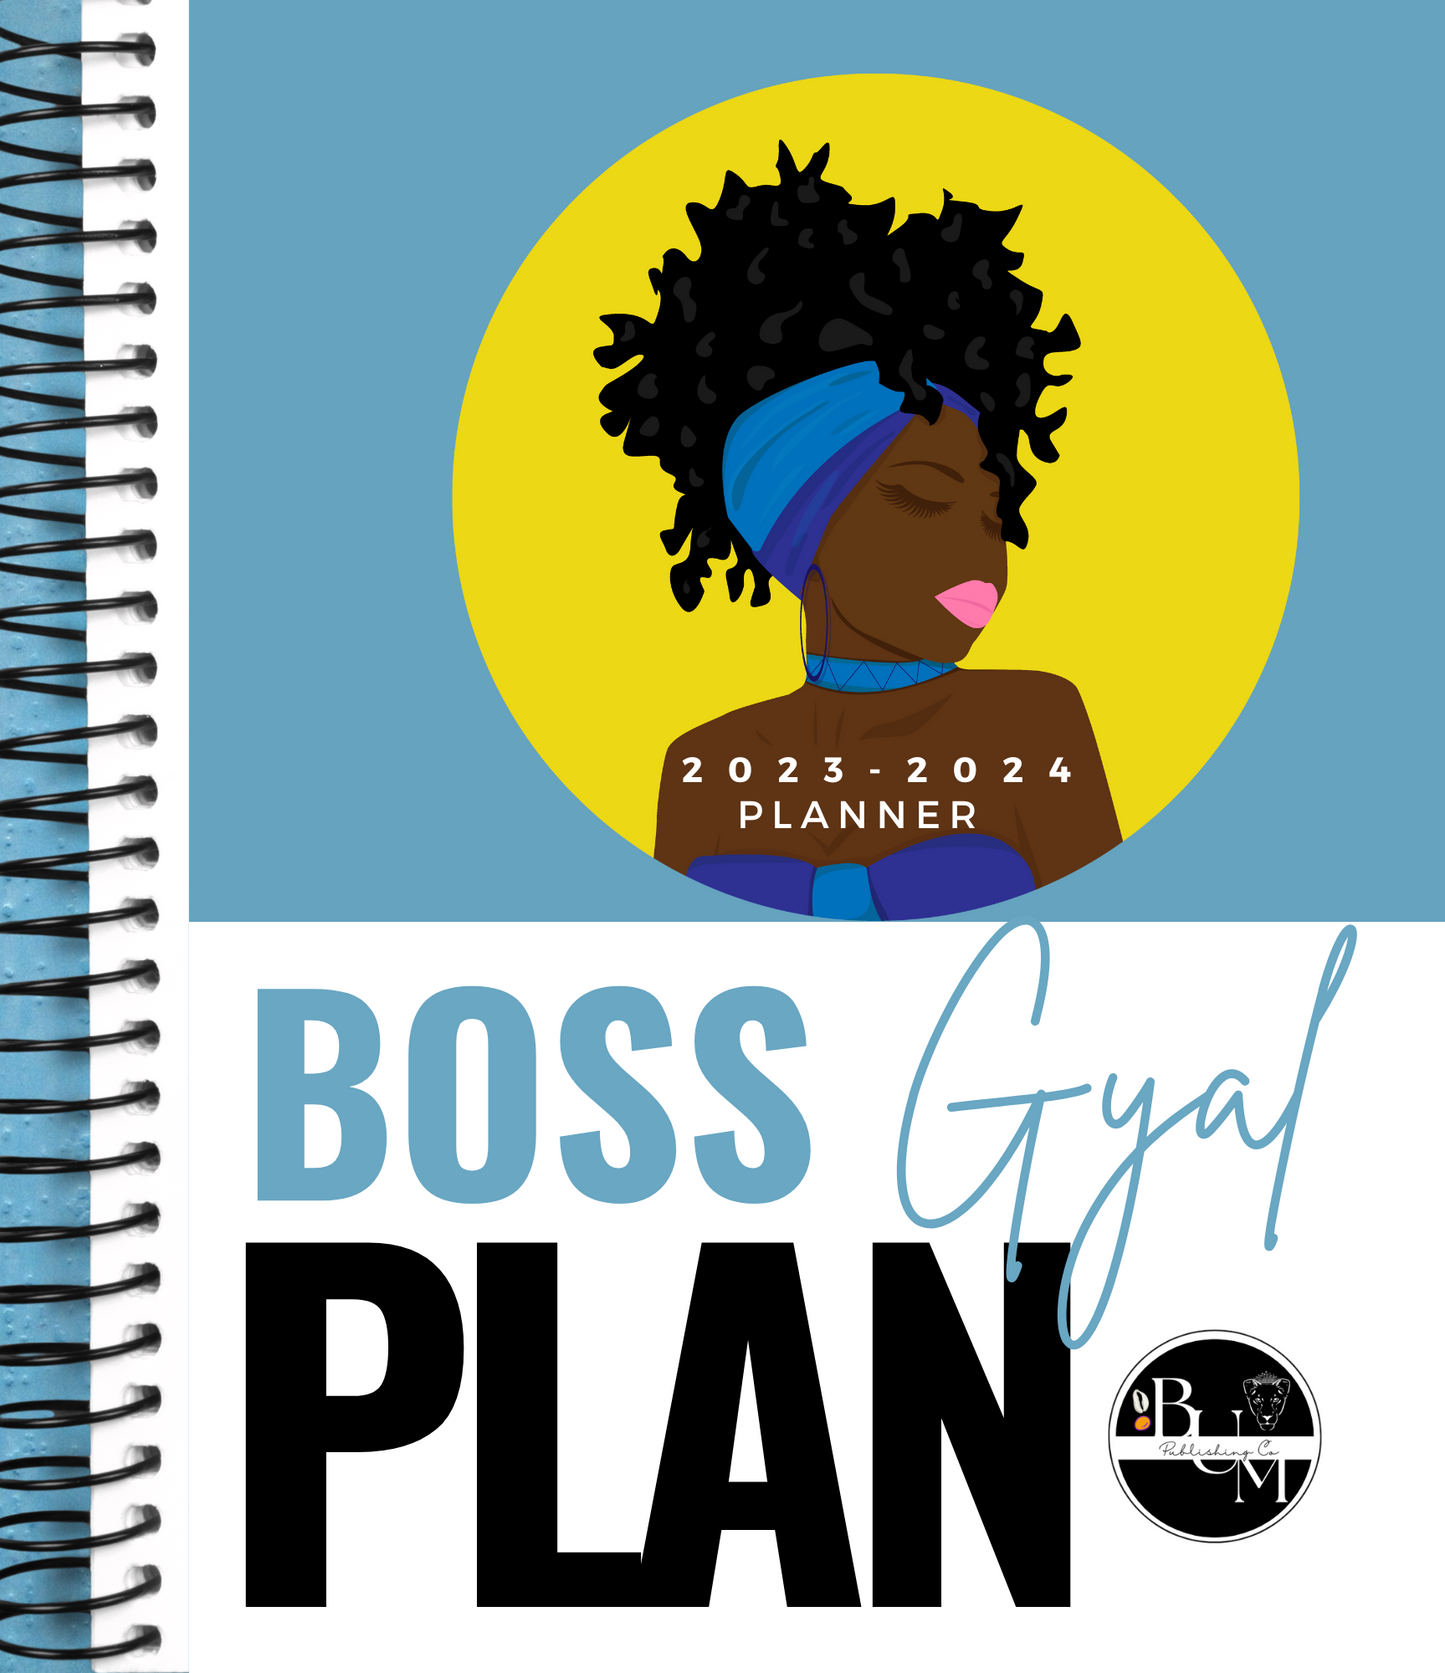 Coming Soon Pre Order yours now! The Boss Gyal  Digital Manifestation Planner